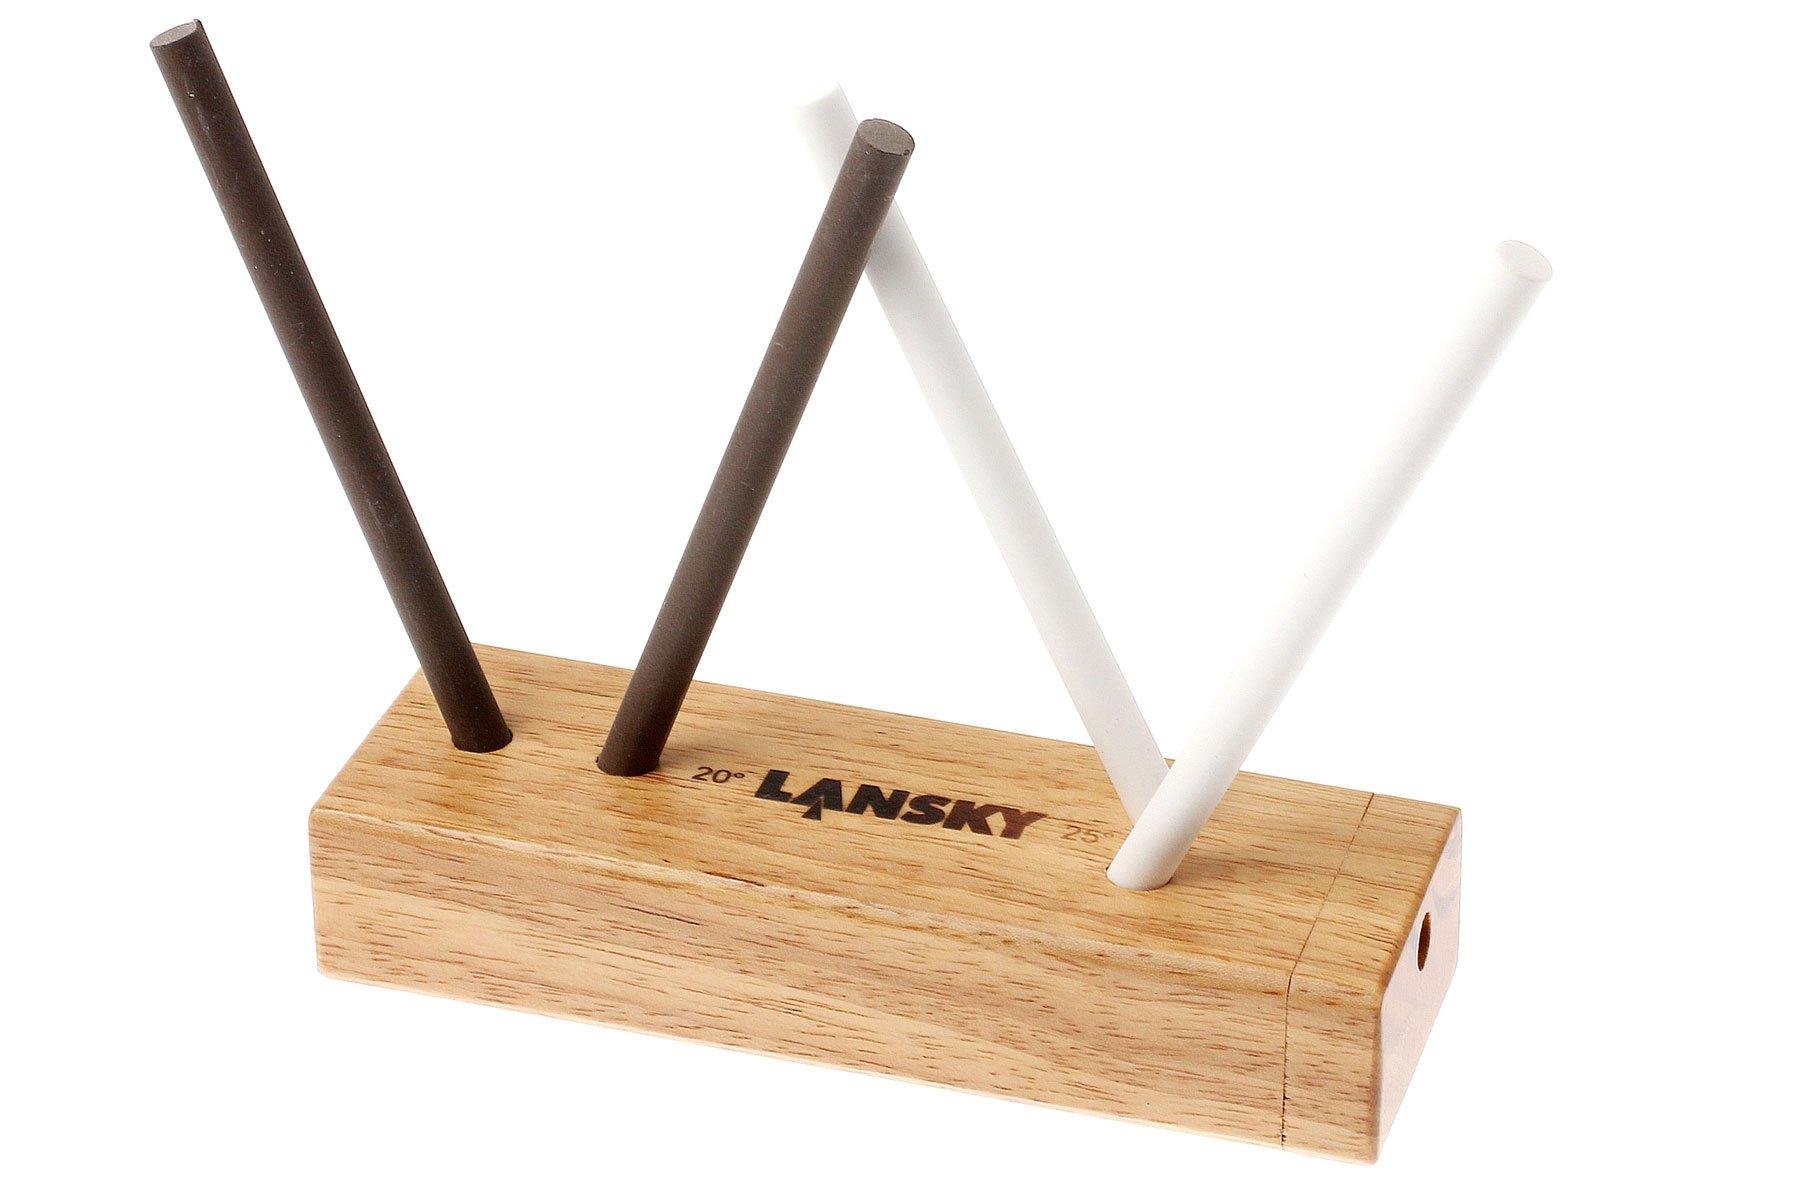 Lansky 33 Deluxe Turn-Box Crock Stick with Two Pre-Set Sharpening Angles -  Knife Country, USA